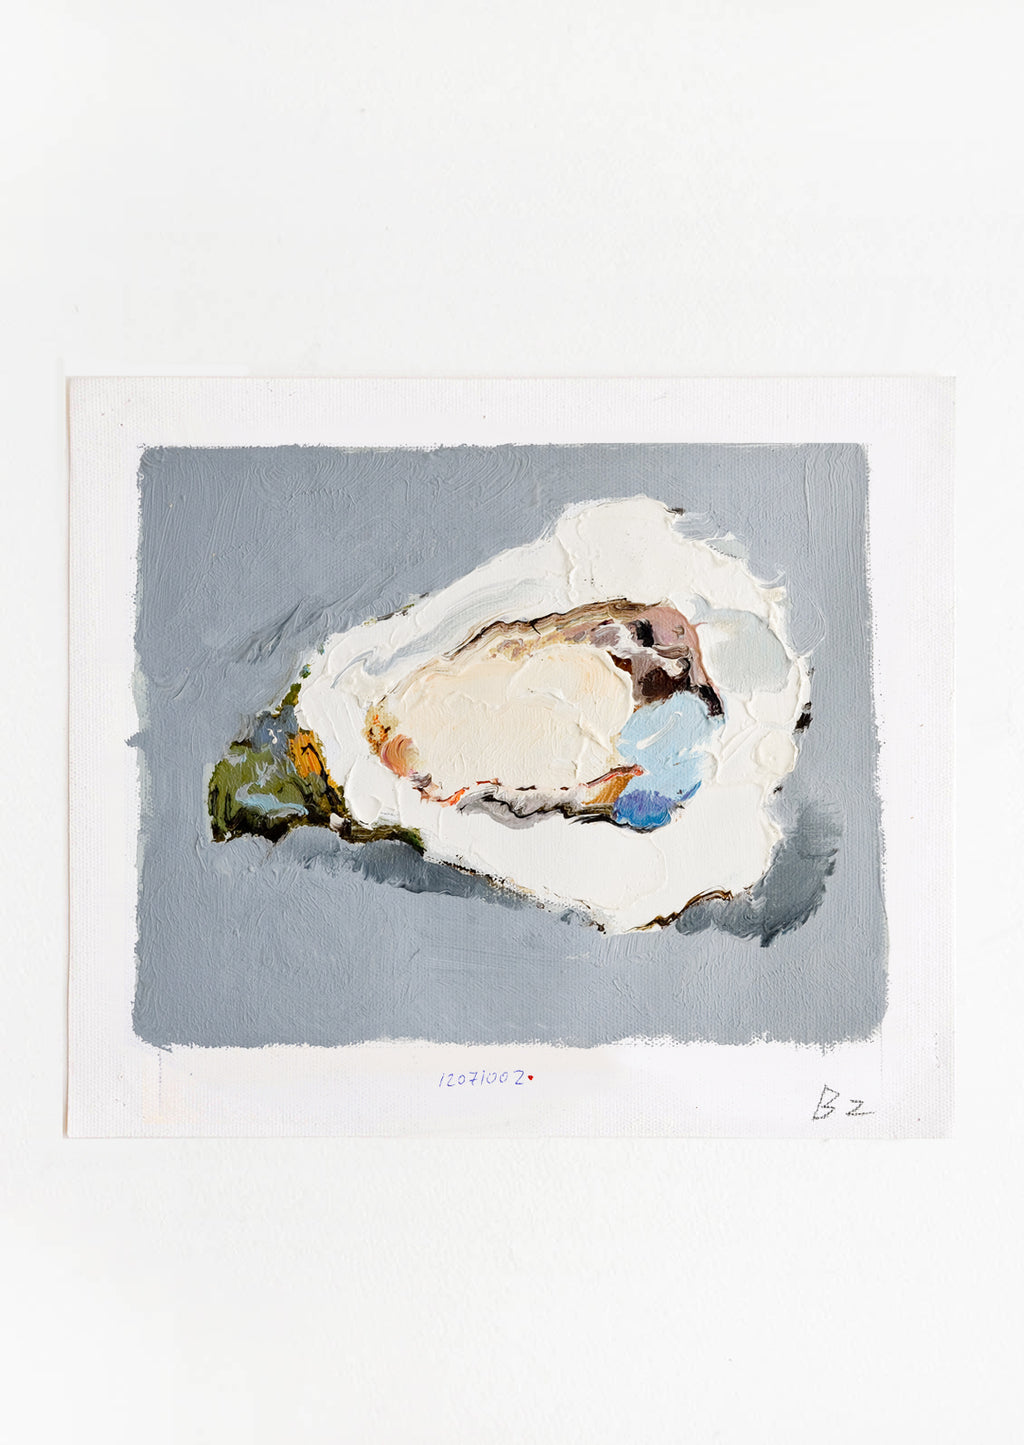 1: Original oil painting with still life image of a single oyster on a grey background.